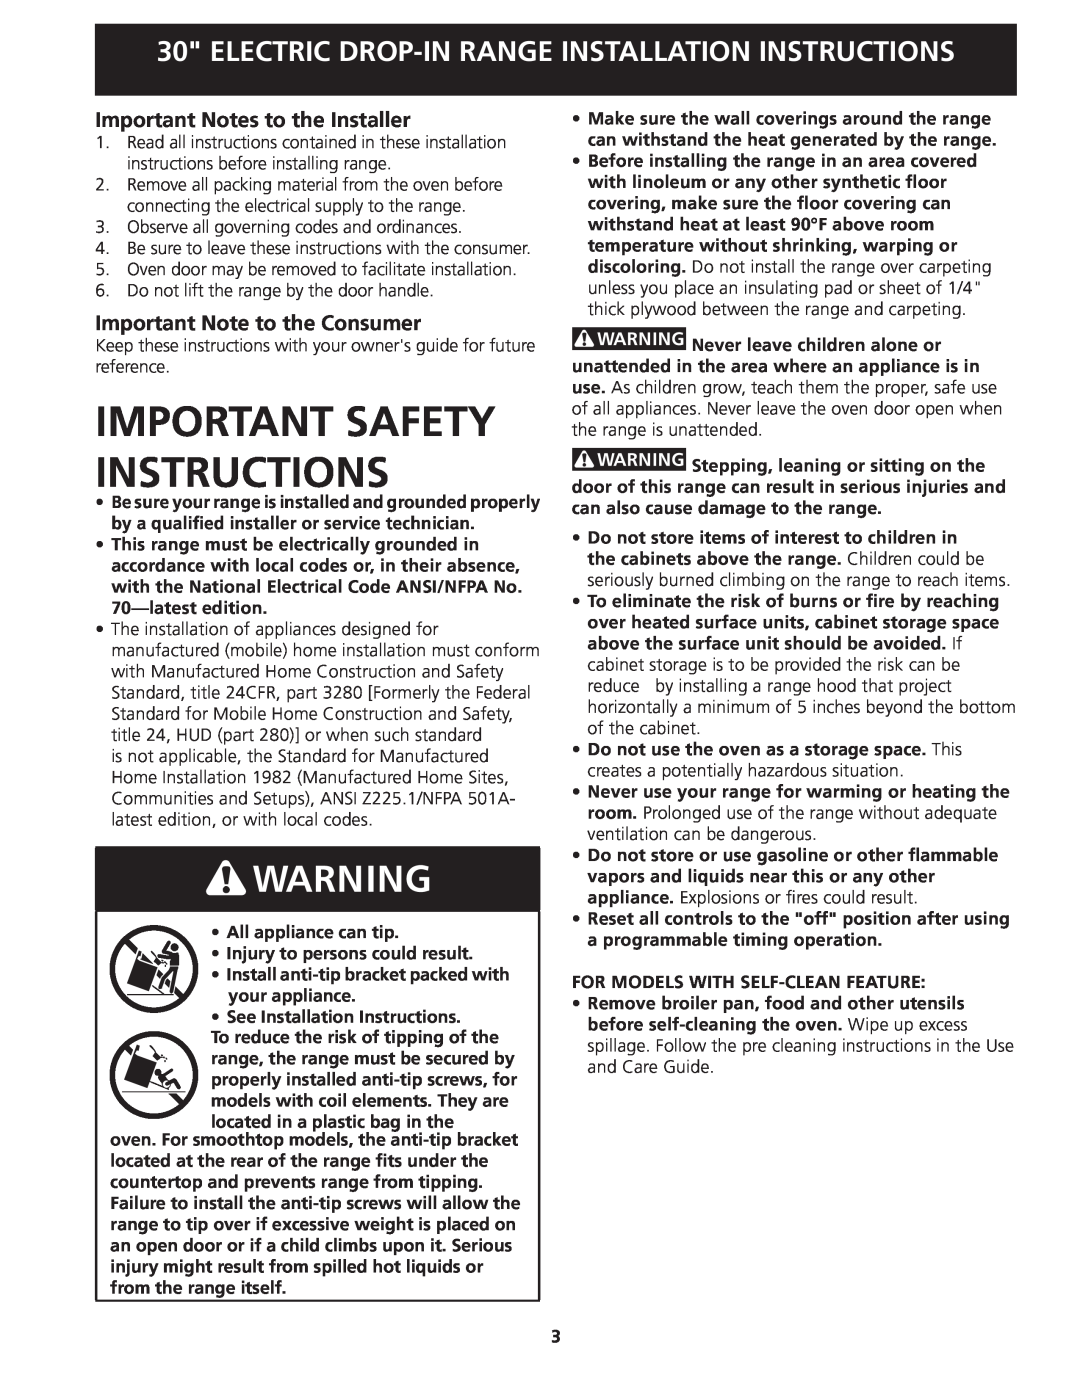 Frigidaire 318201613 Important Safety Instructions, Important Notes to the Installer, Important Note to the Consumer 